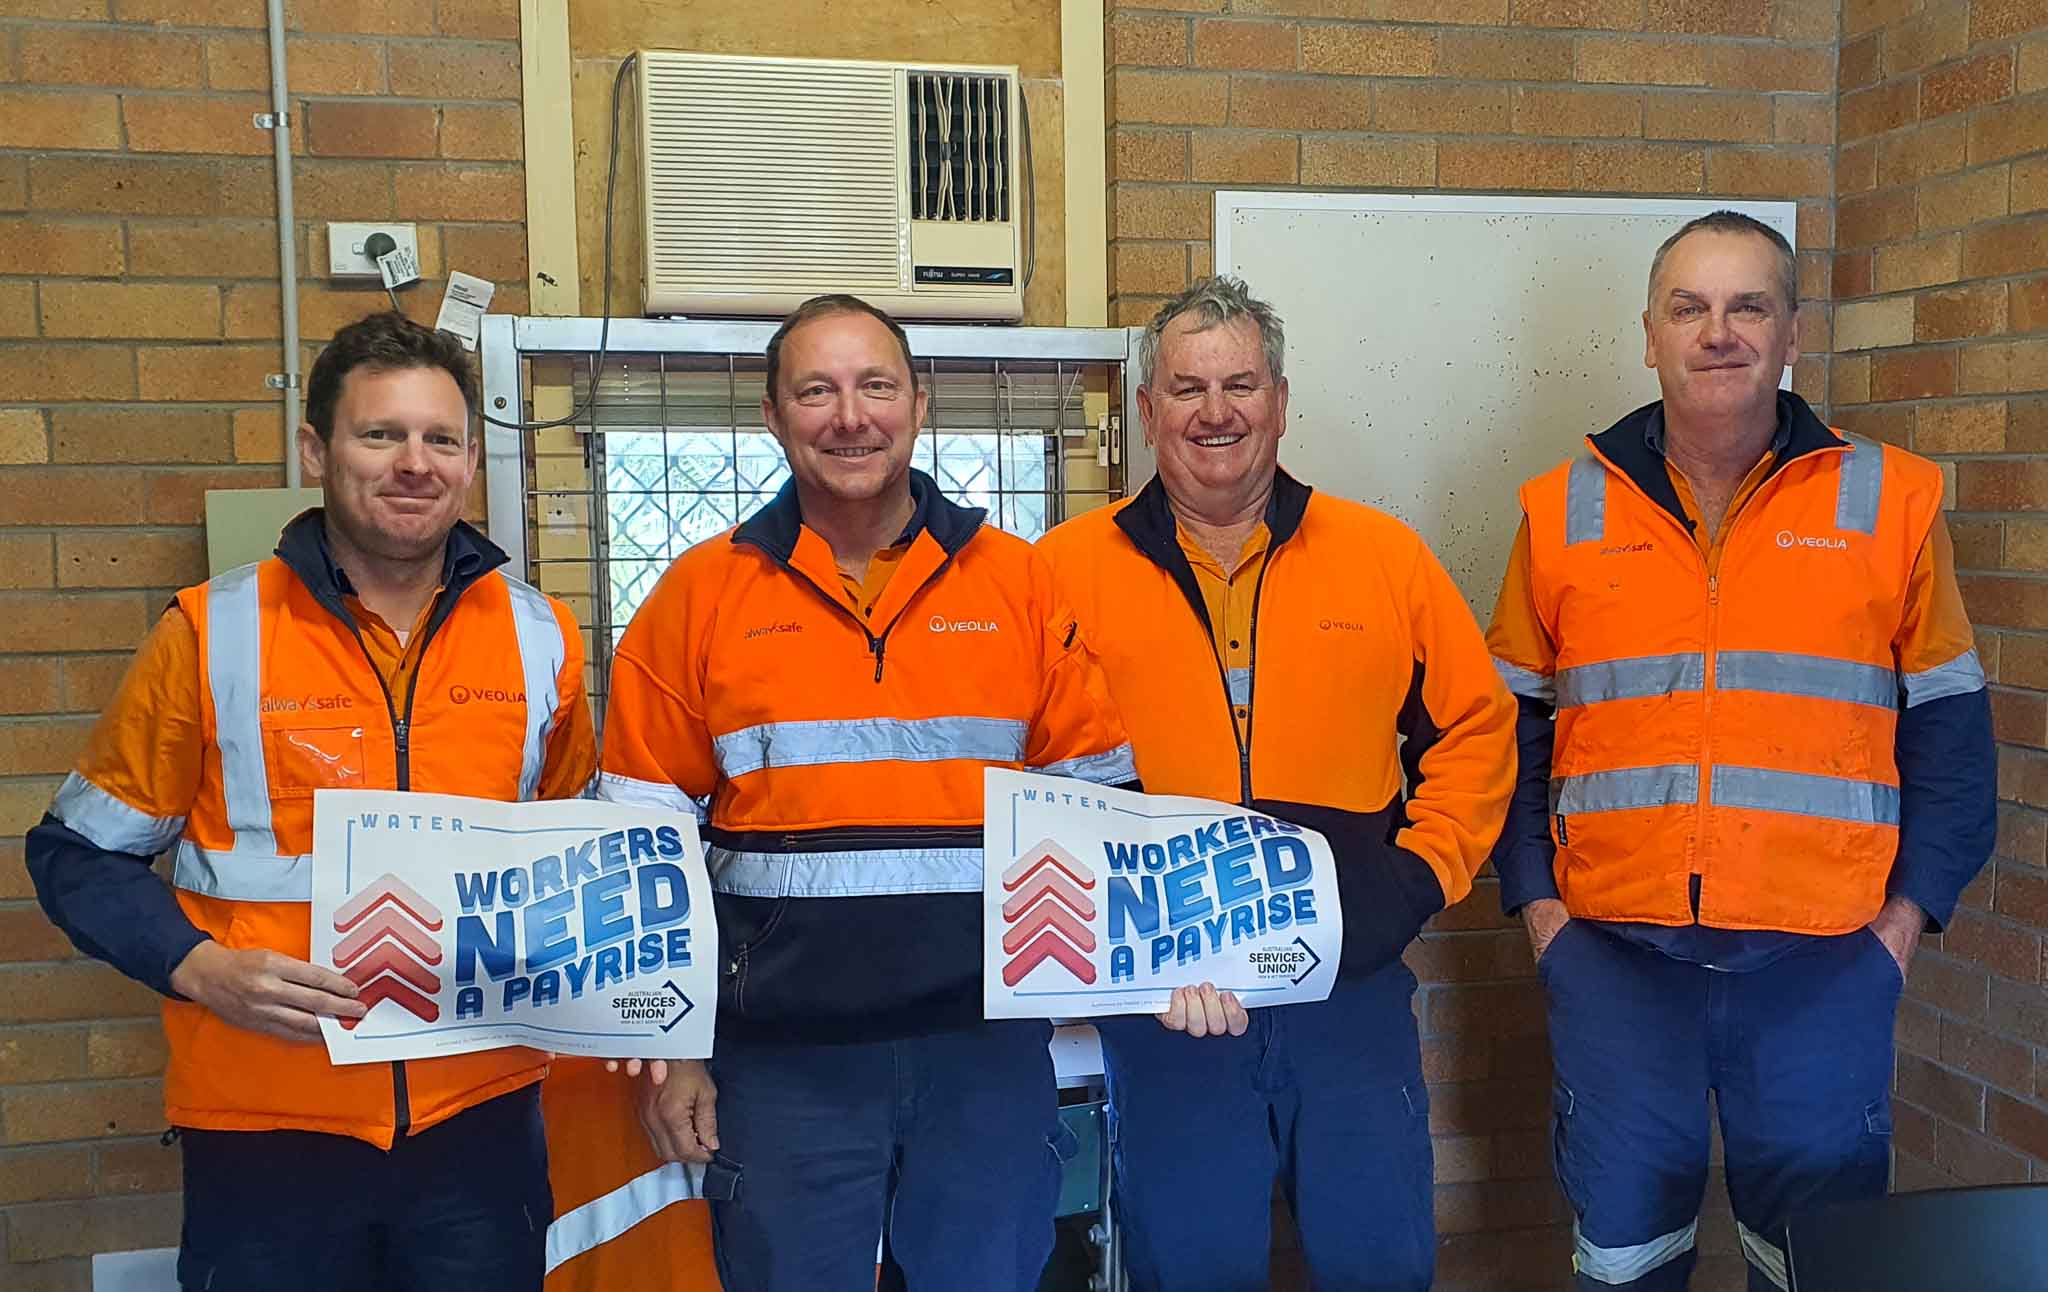 Water Workers at Veolia need a pay rise!